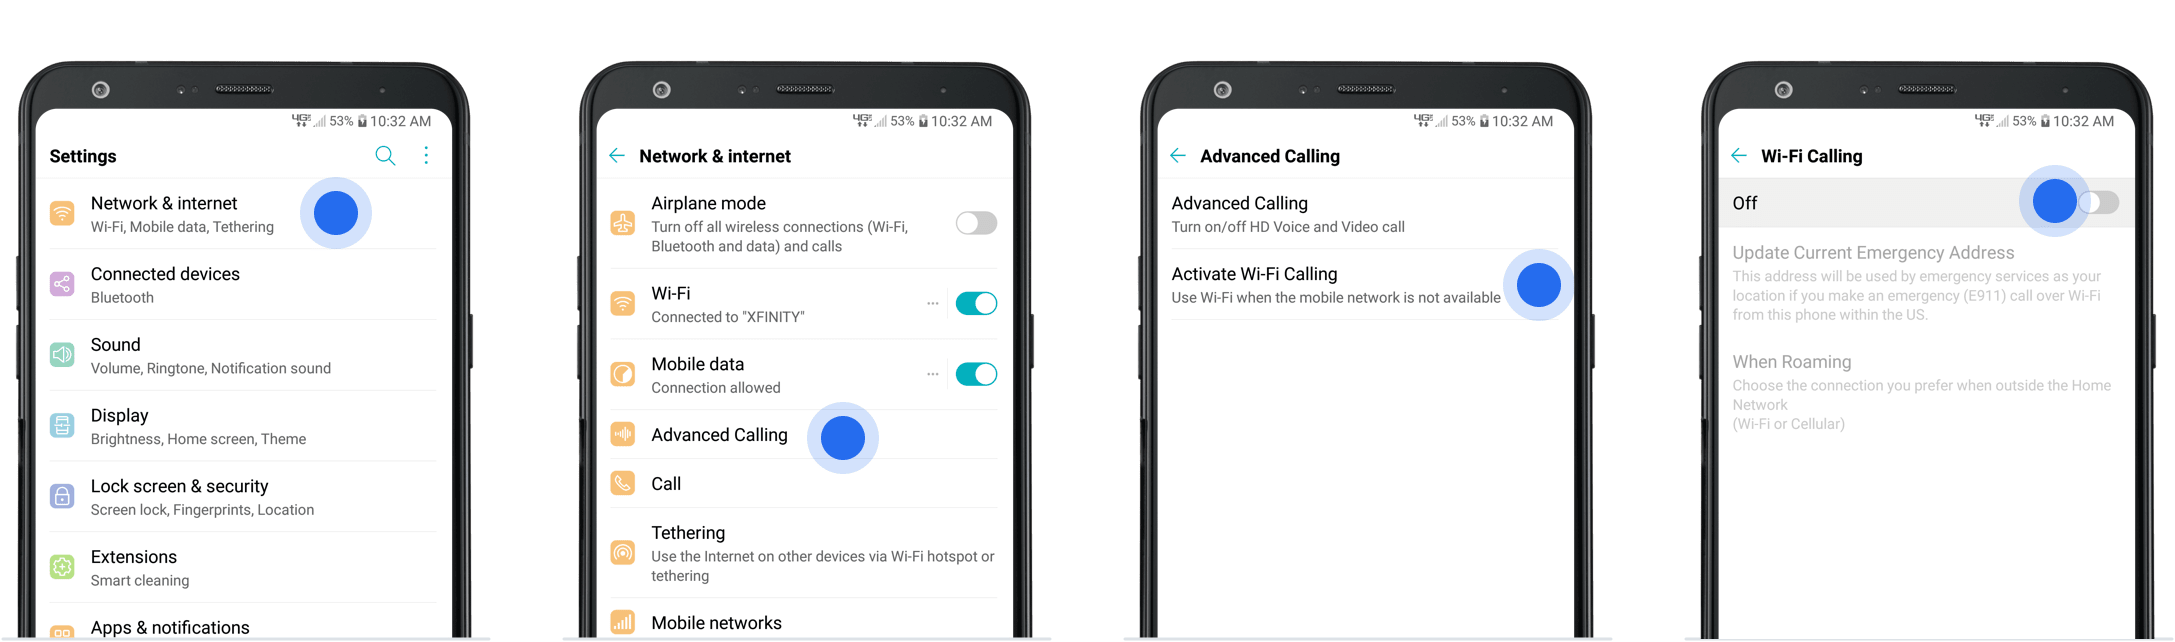 how to turn off wifi calling notification